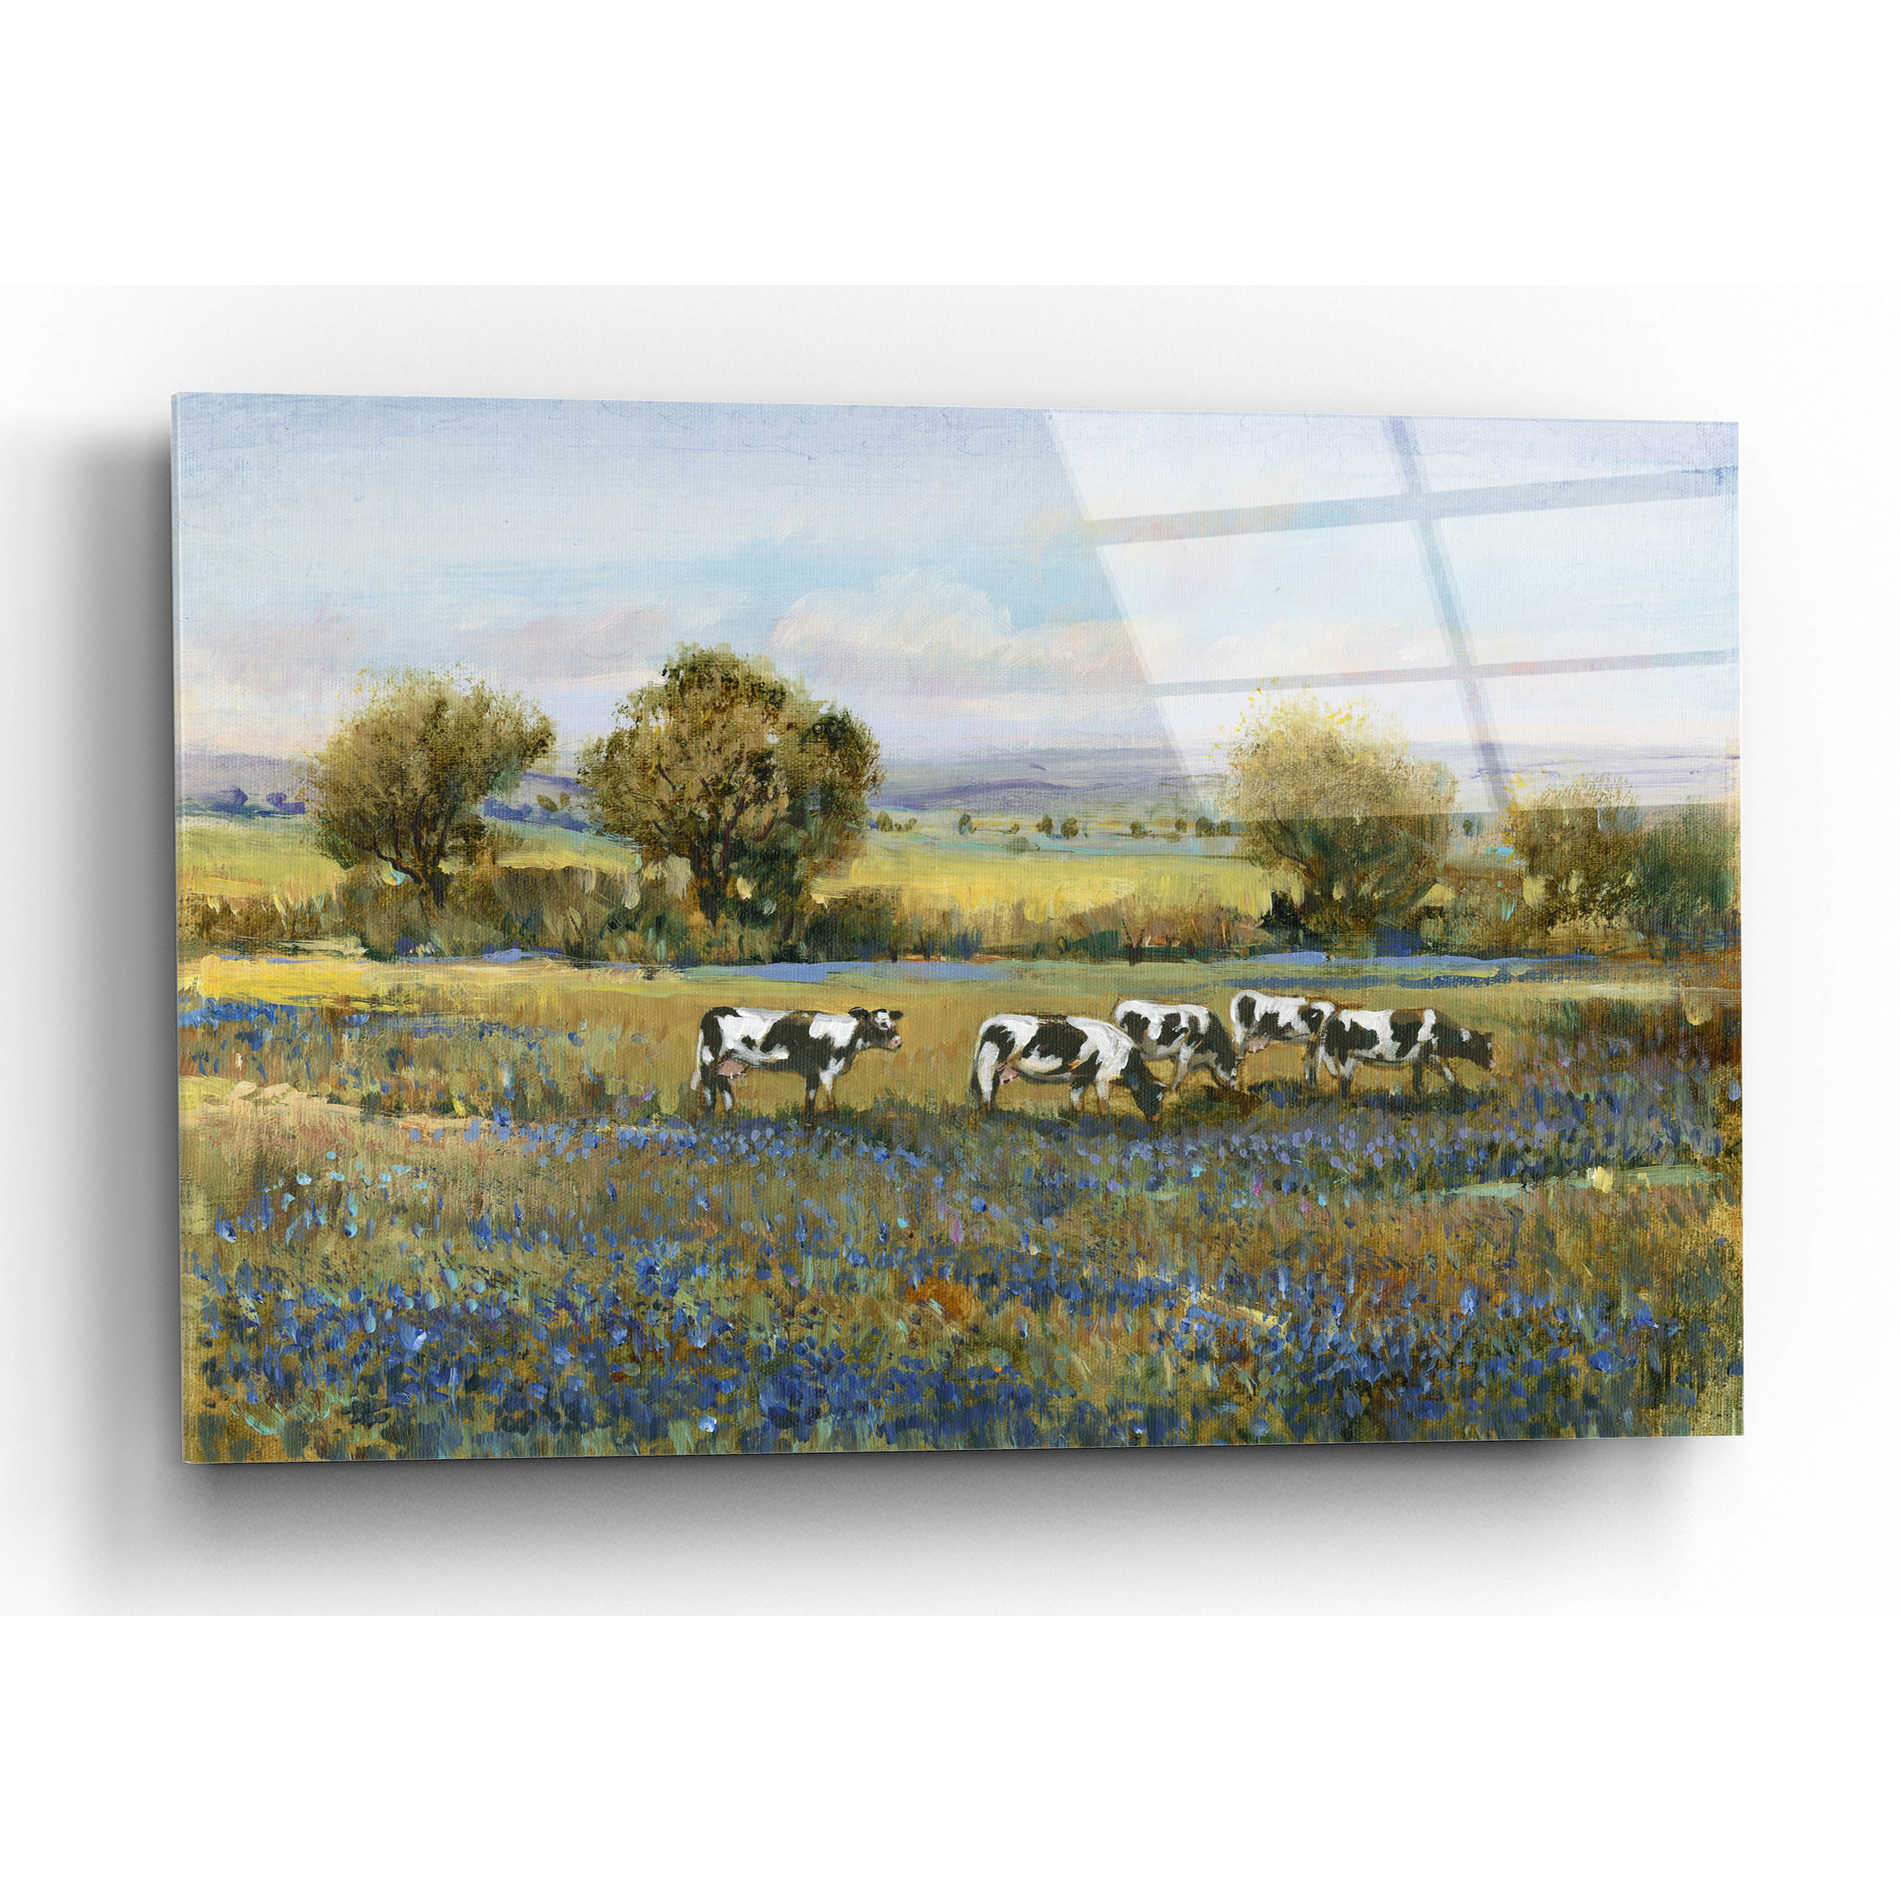 Epic Art 'Field of Cattle I' by Tim O'Toole, Acrylic Glass Wall Art,16x12